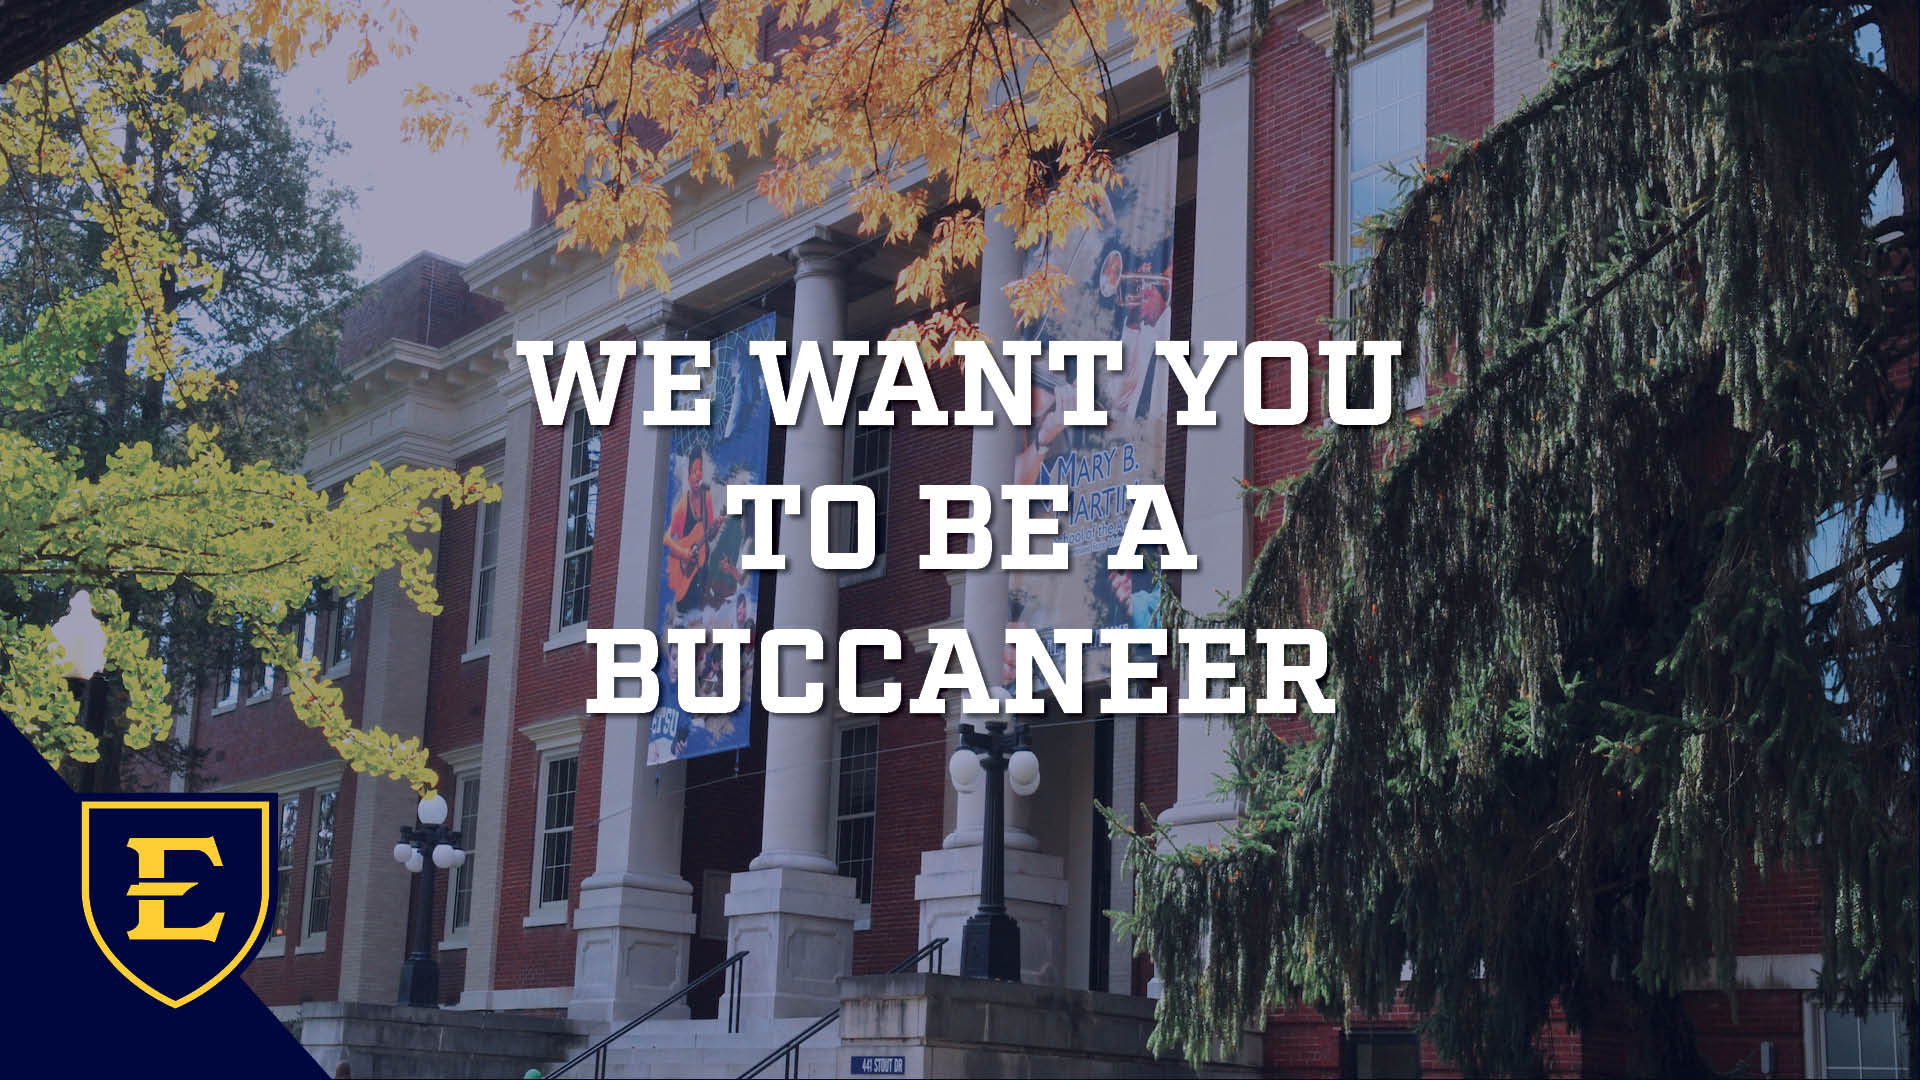 We want you to be a Buccaneer